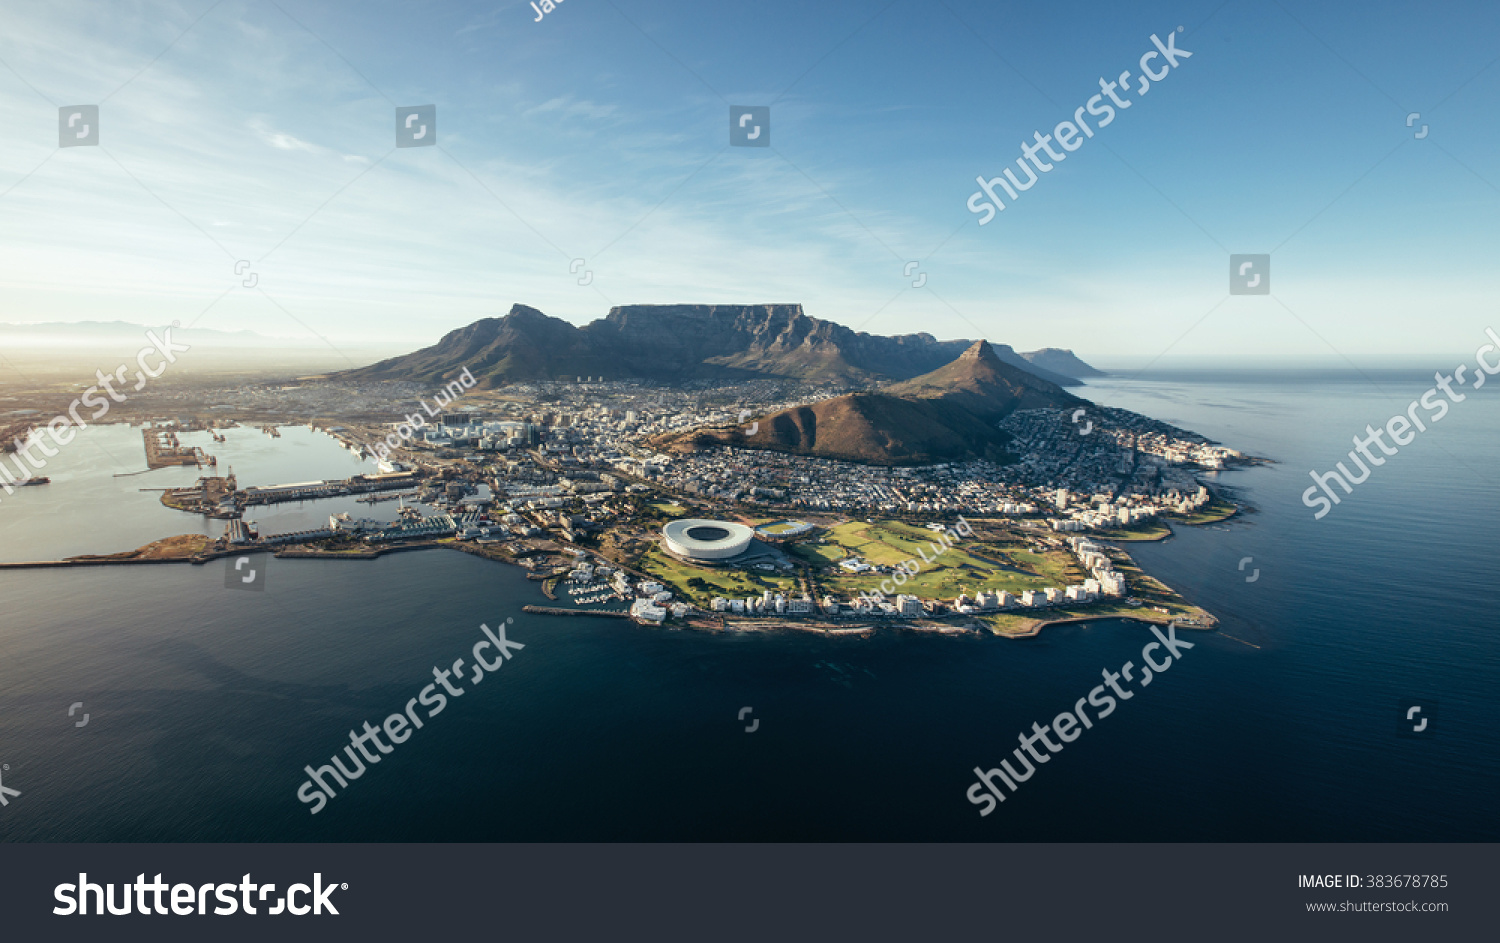 Aerial coastal view of Cape Town. View of cape town city with table mountain, cape town harbour, lion's head and devil's peak, South Africa. #383678785